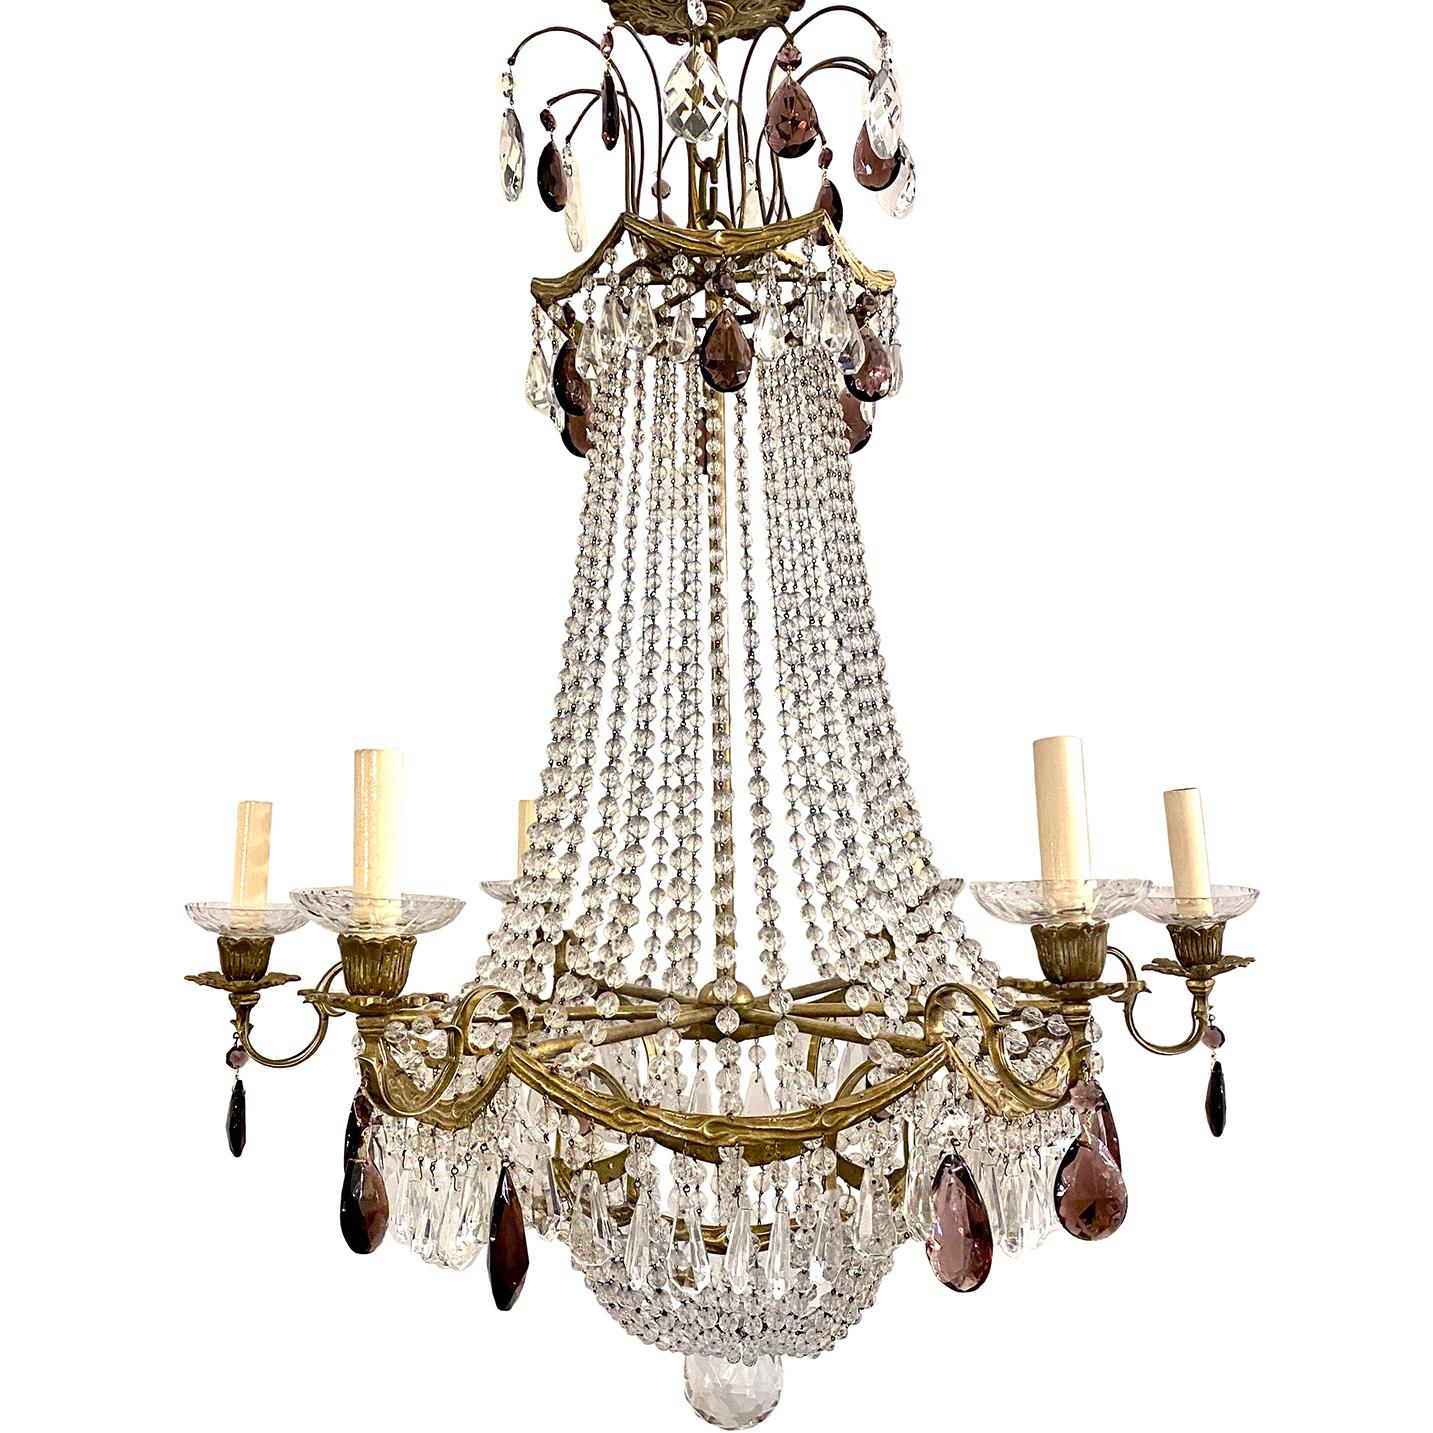 19th Century French Neoclassic Crystal Chandelier For Sale